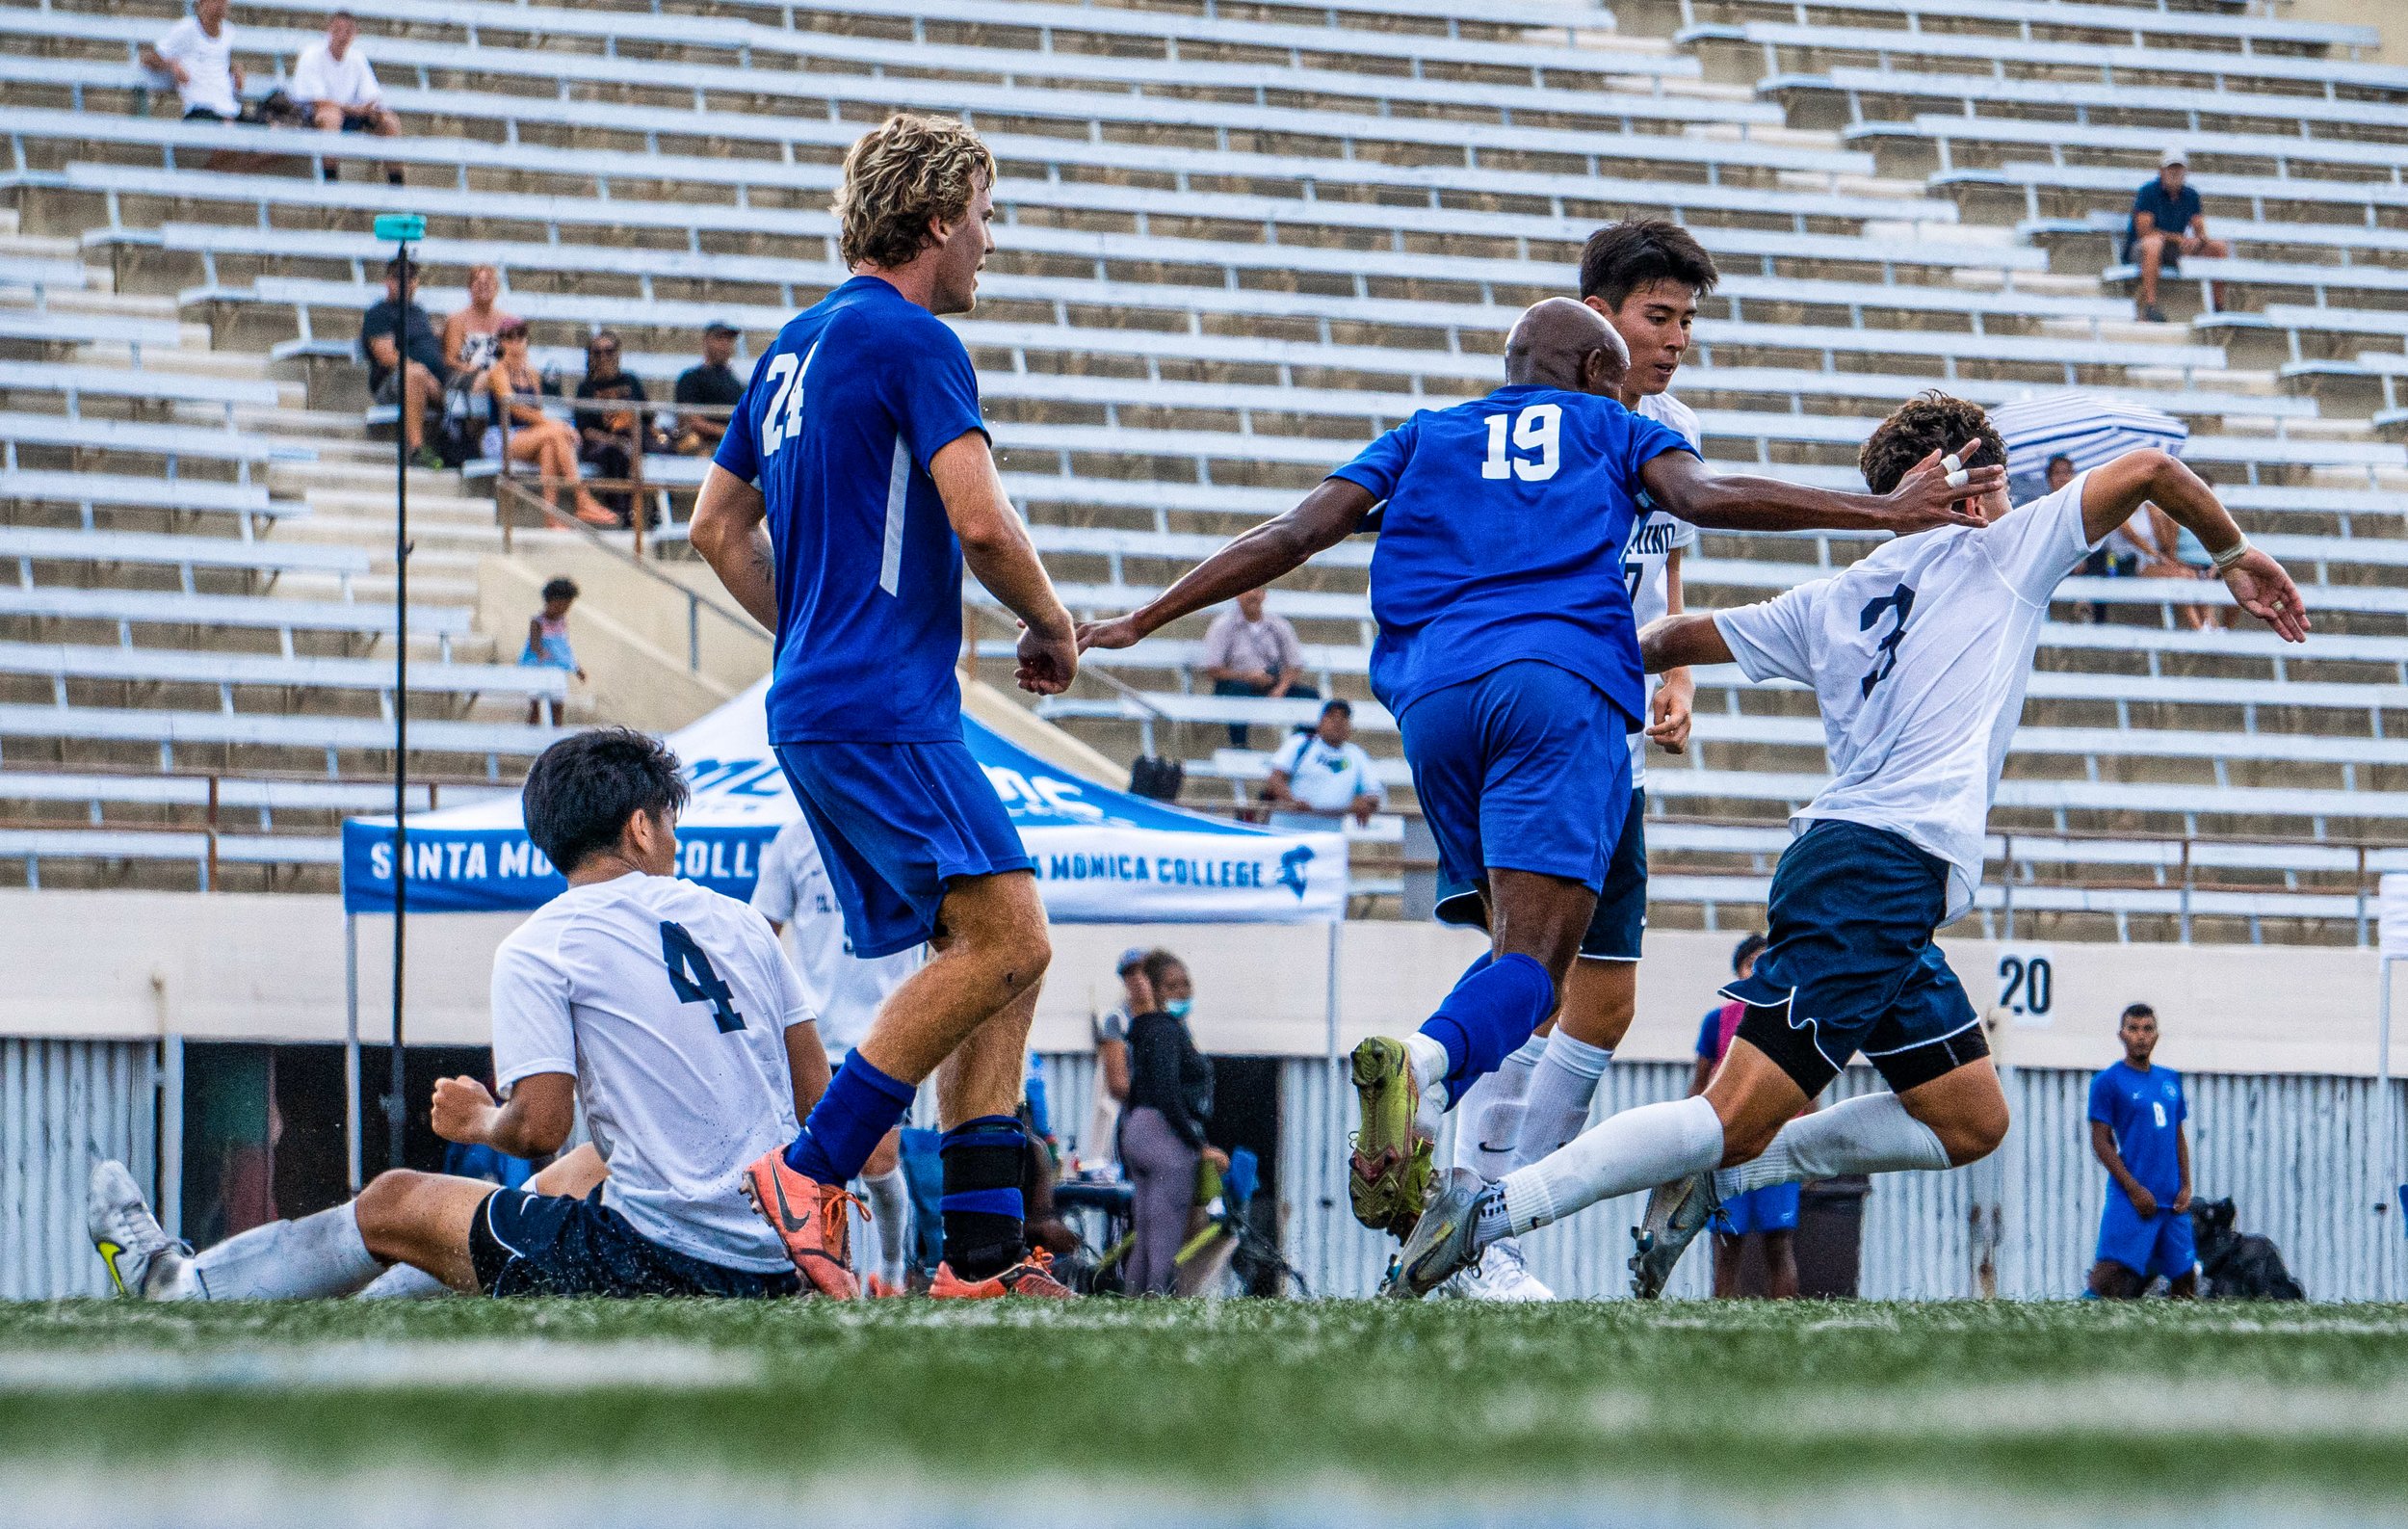  Both teams chase the ball to the ground as supporters watch from the stands. The Corsair Field in Santa Monica, Calif. On Friday, September 2, 2022. (Tsen Ee Lin | The Corsair) 